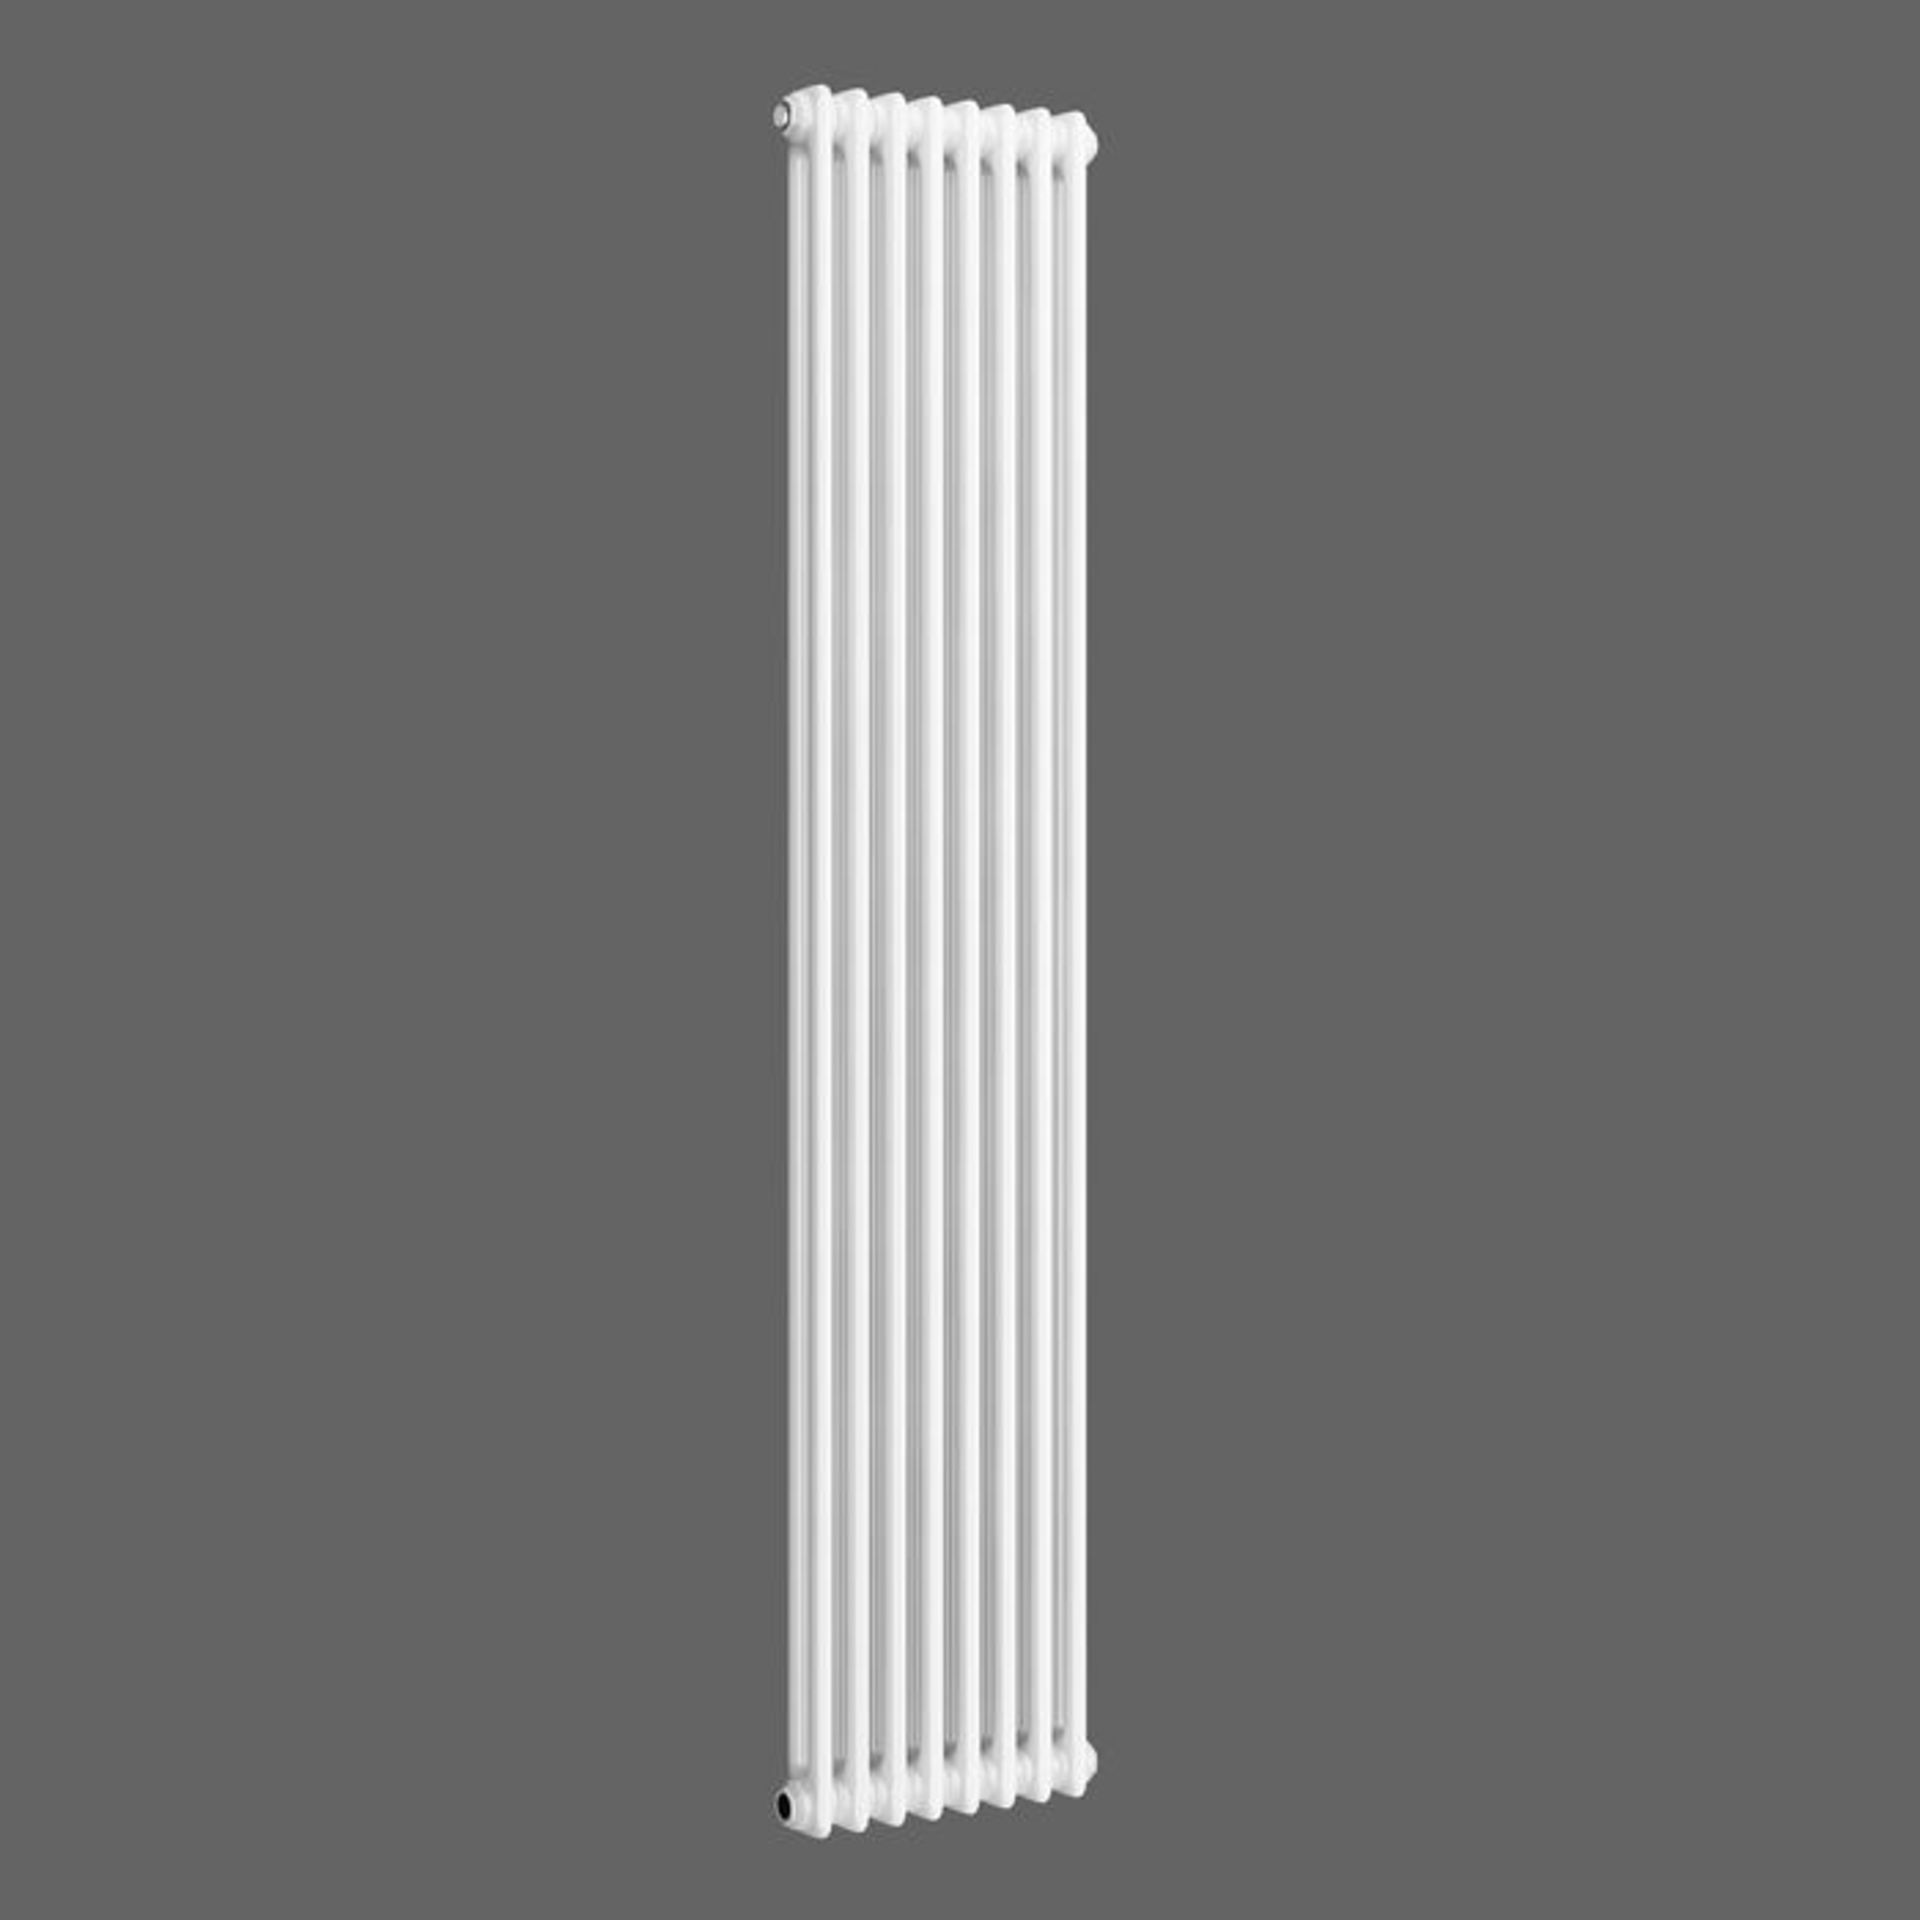 (DD132) 2000x306mm White Double Panel Vertical Colosseum Traditional Radiator. RRP £326.((DD132) - Image 4 of 4